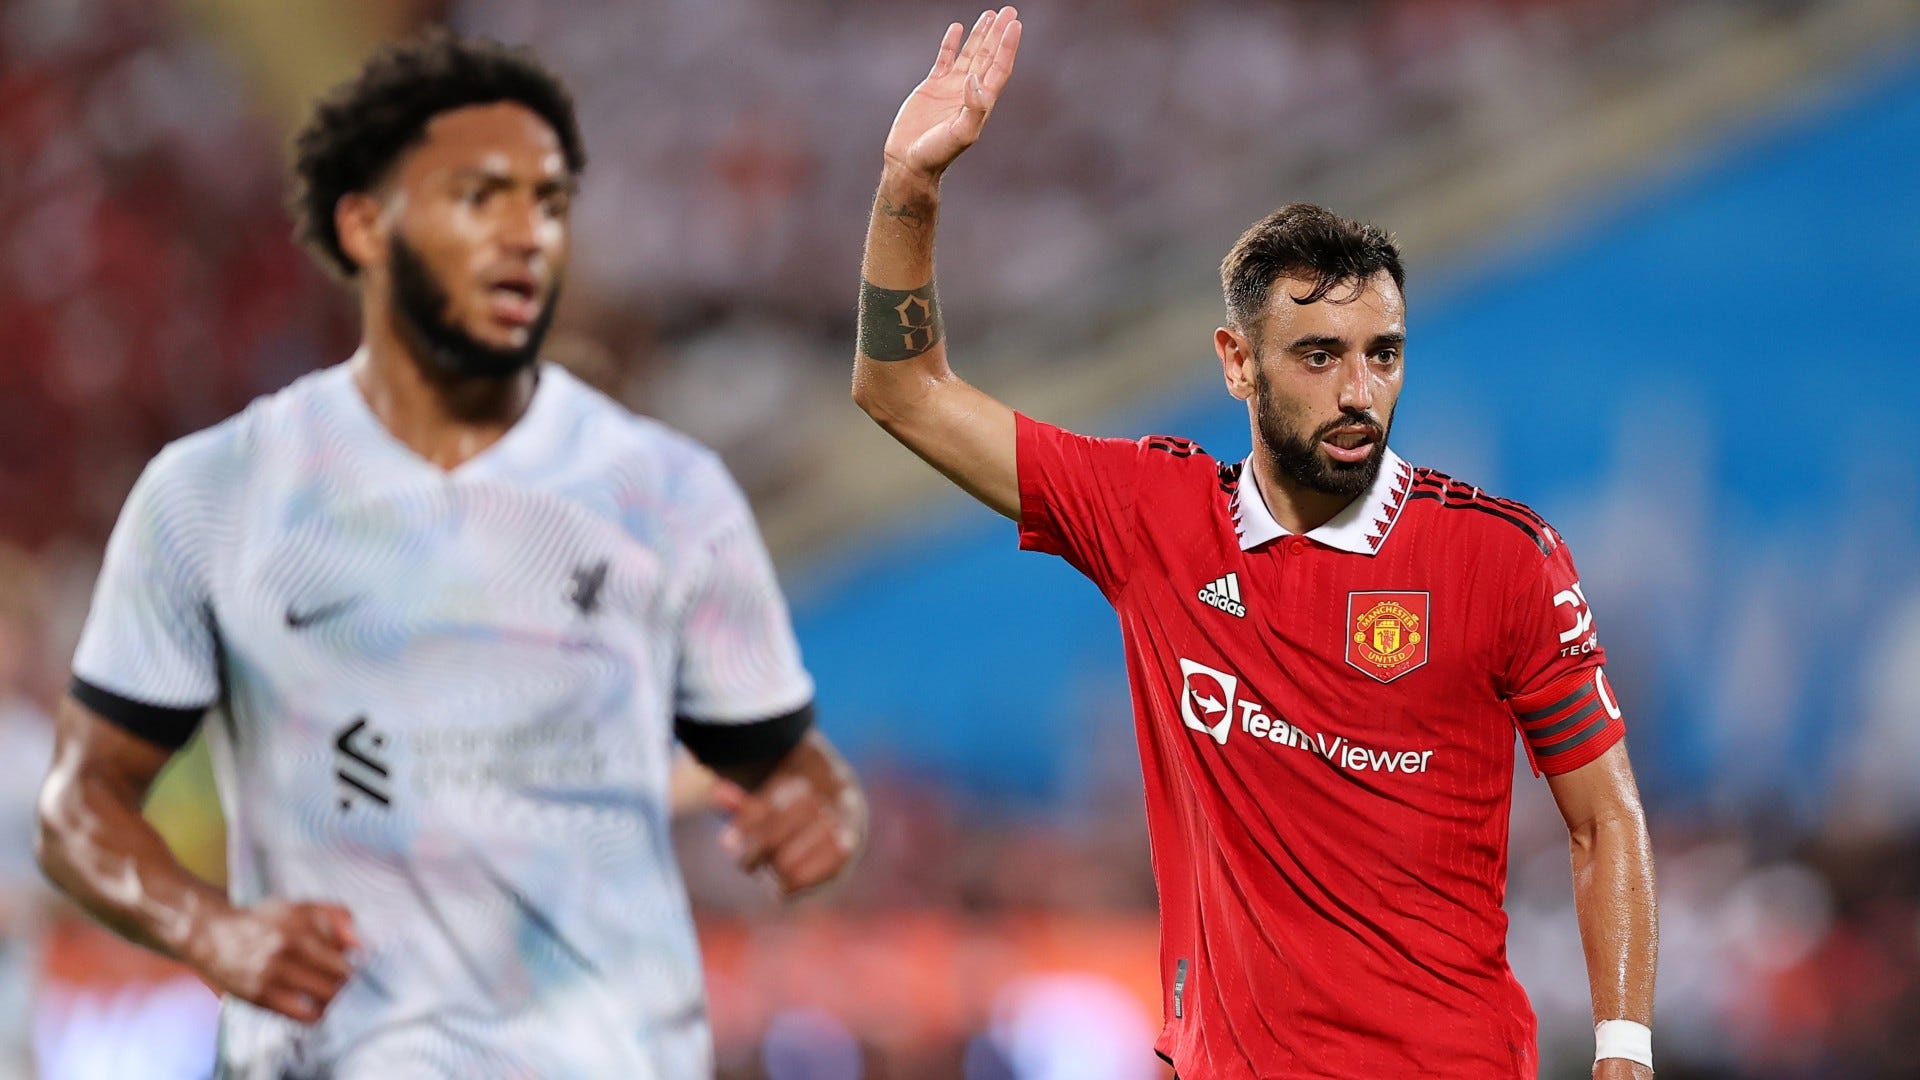 Man Utd vs Liverpool Live stream, TV channel, kick-off time and how to watch Goal US